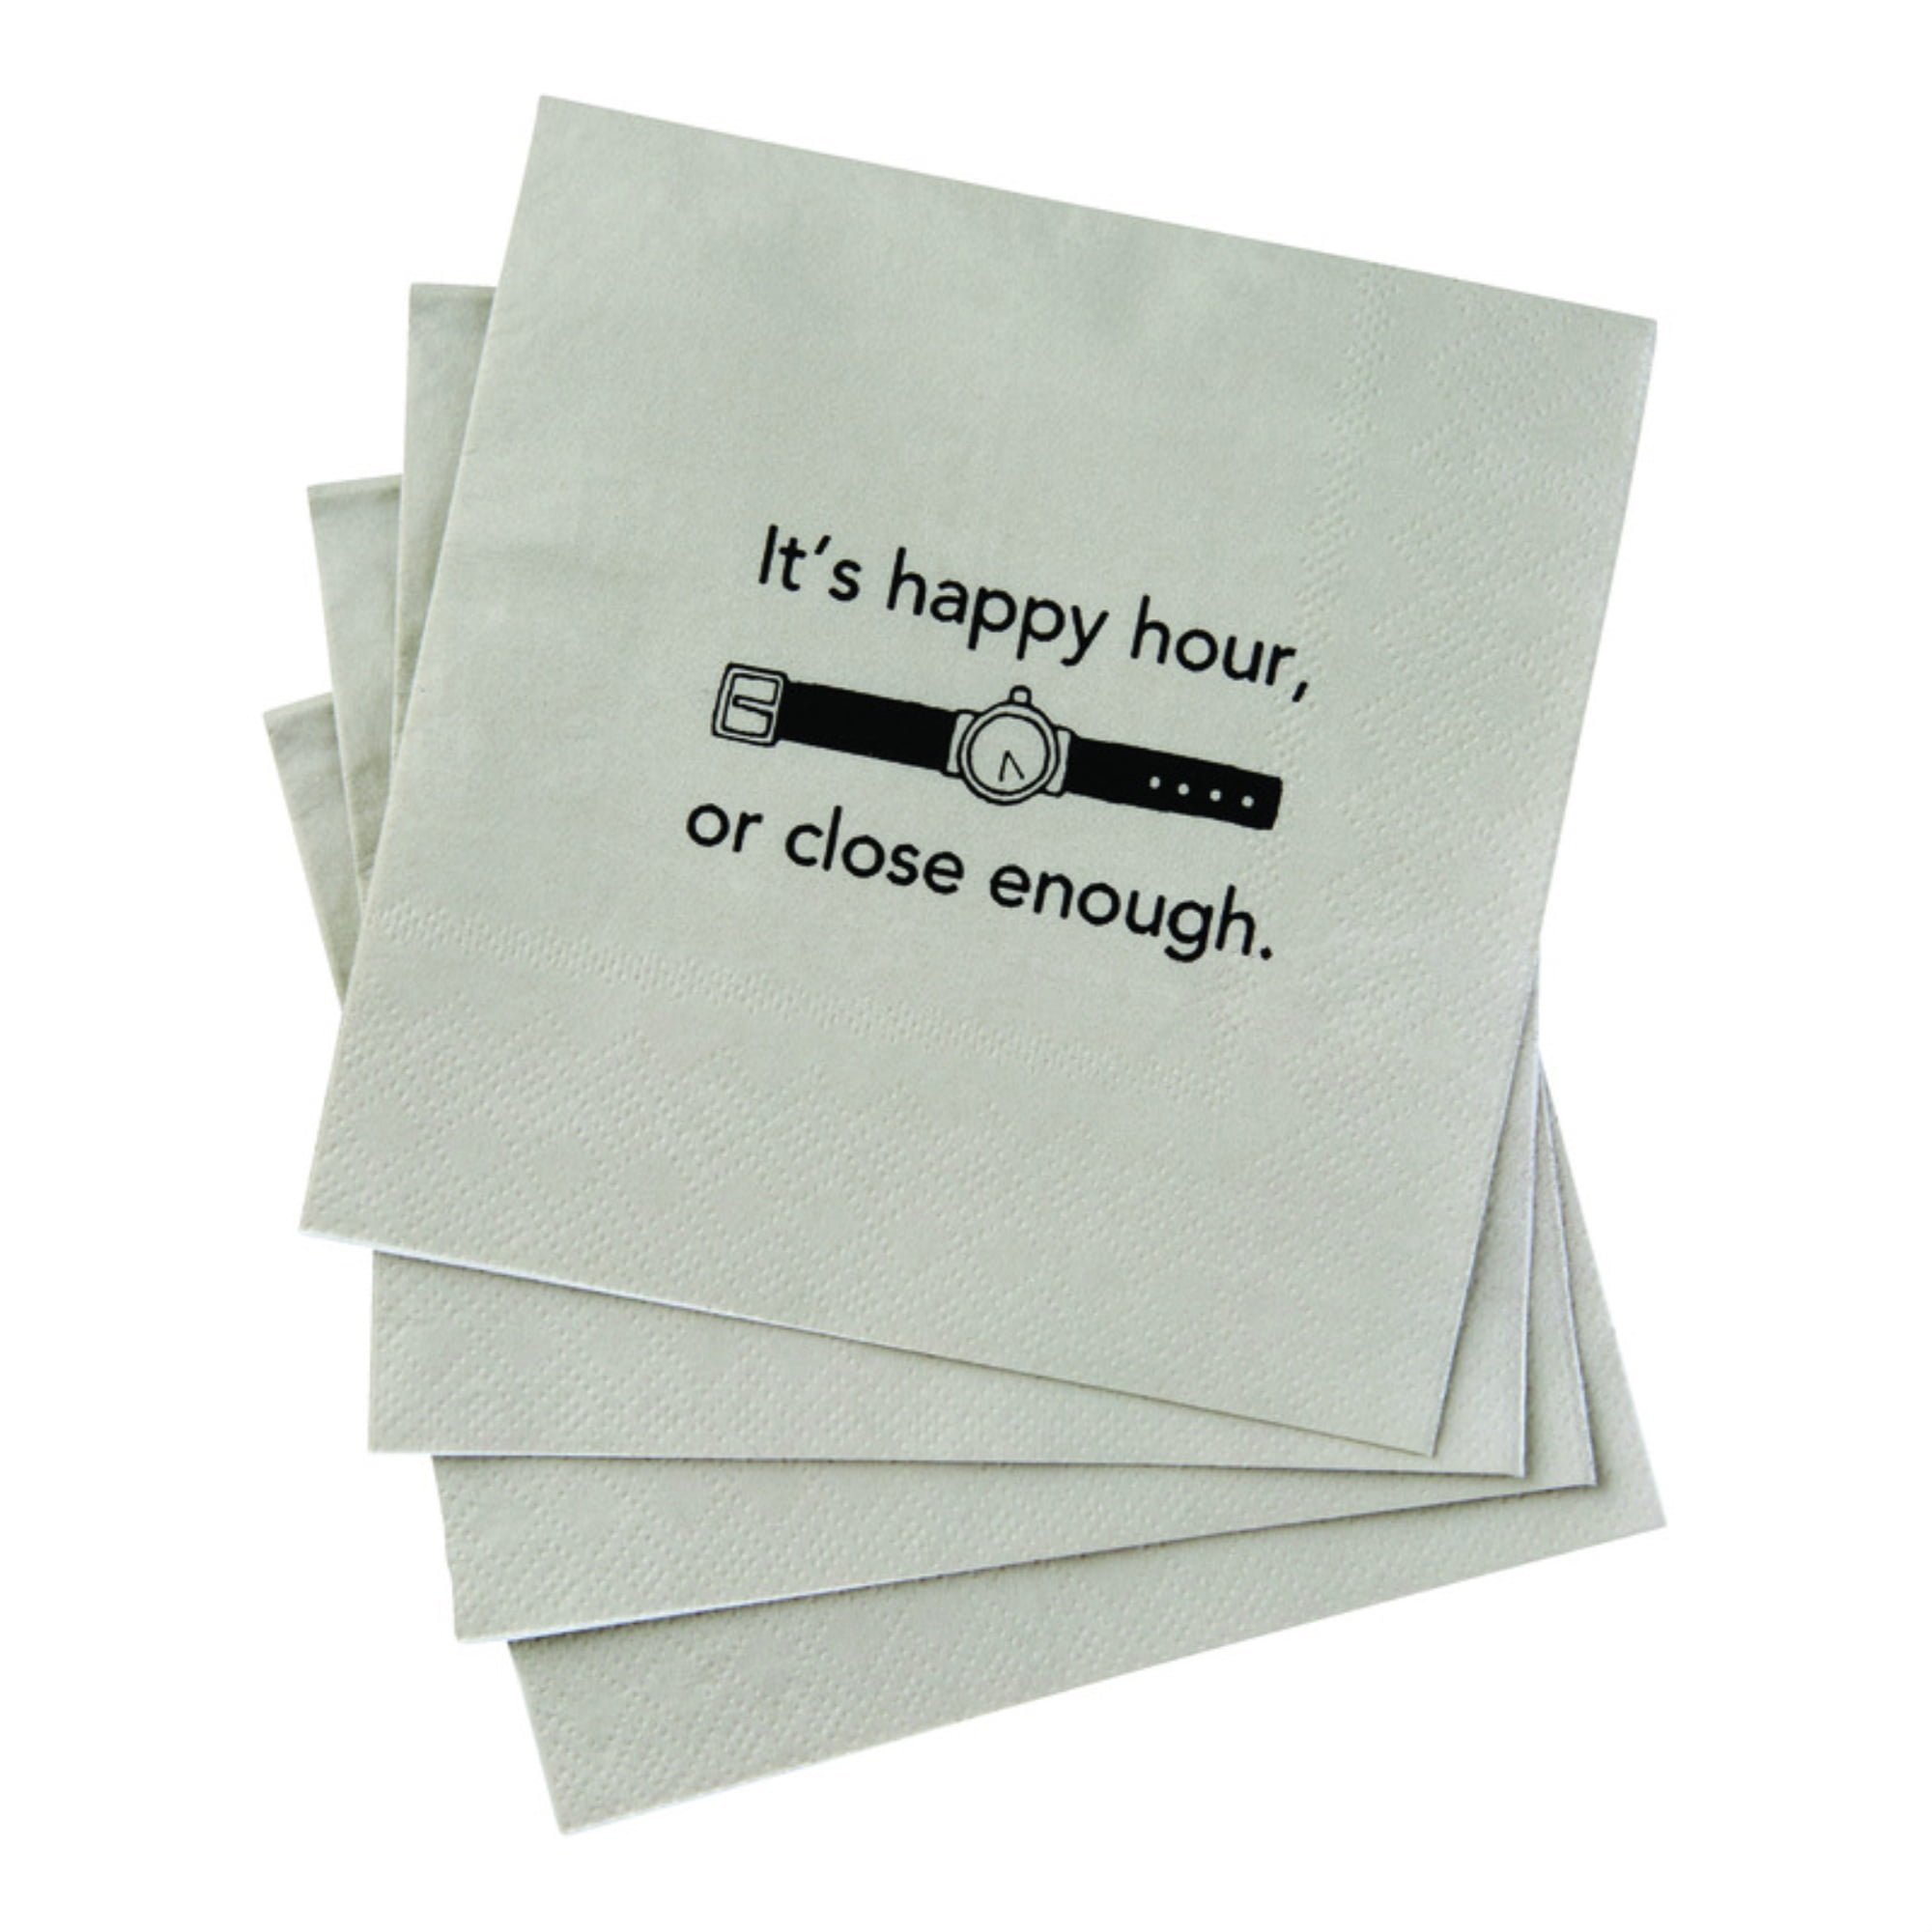 Hallmark 6519383 Its Happy Hour or Close Enough Napkins Paper, Assorted - 20 per Case, Pack of 4